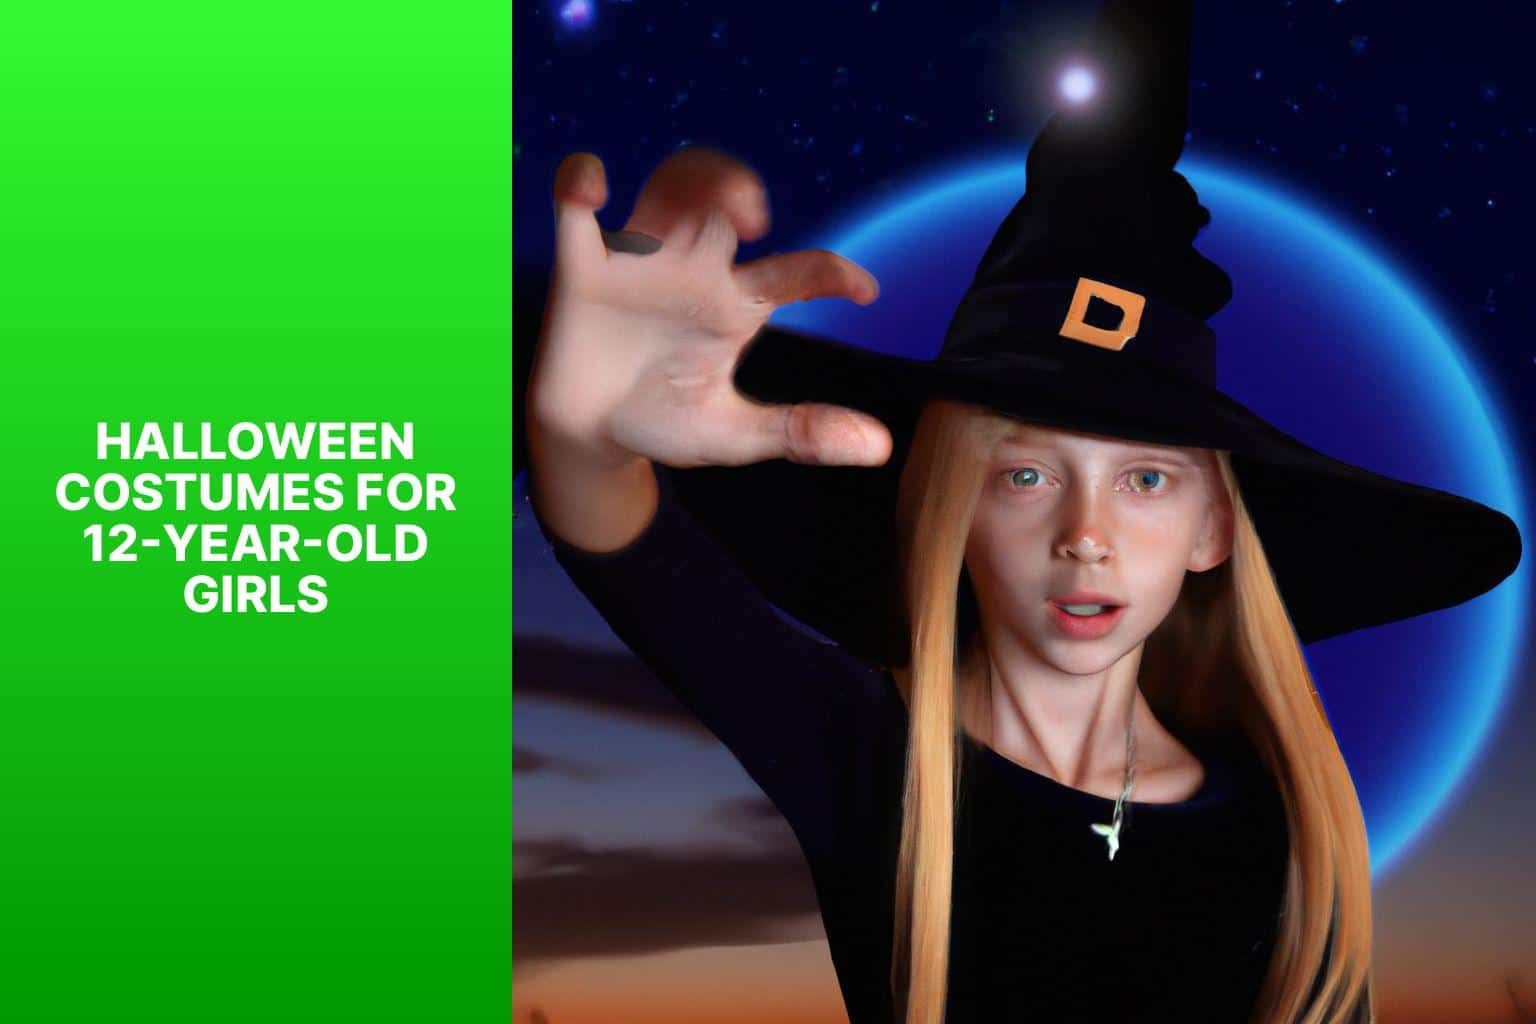 Halloween Costumes for 12-Year-Old Girls - halloween costumes for 12 year olds girl 